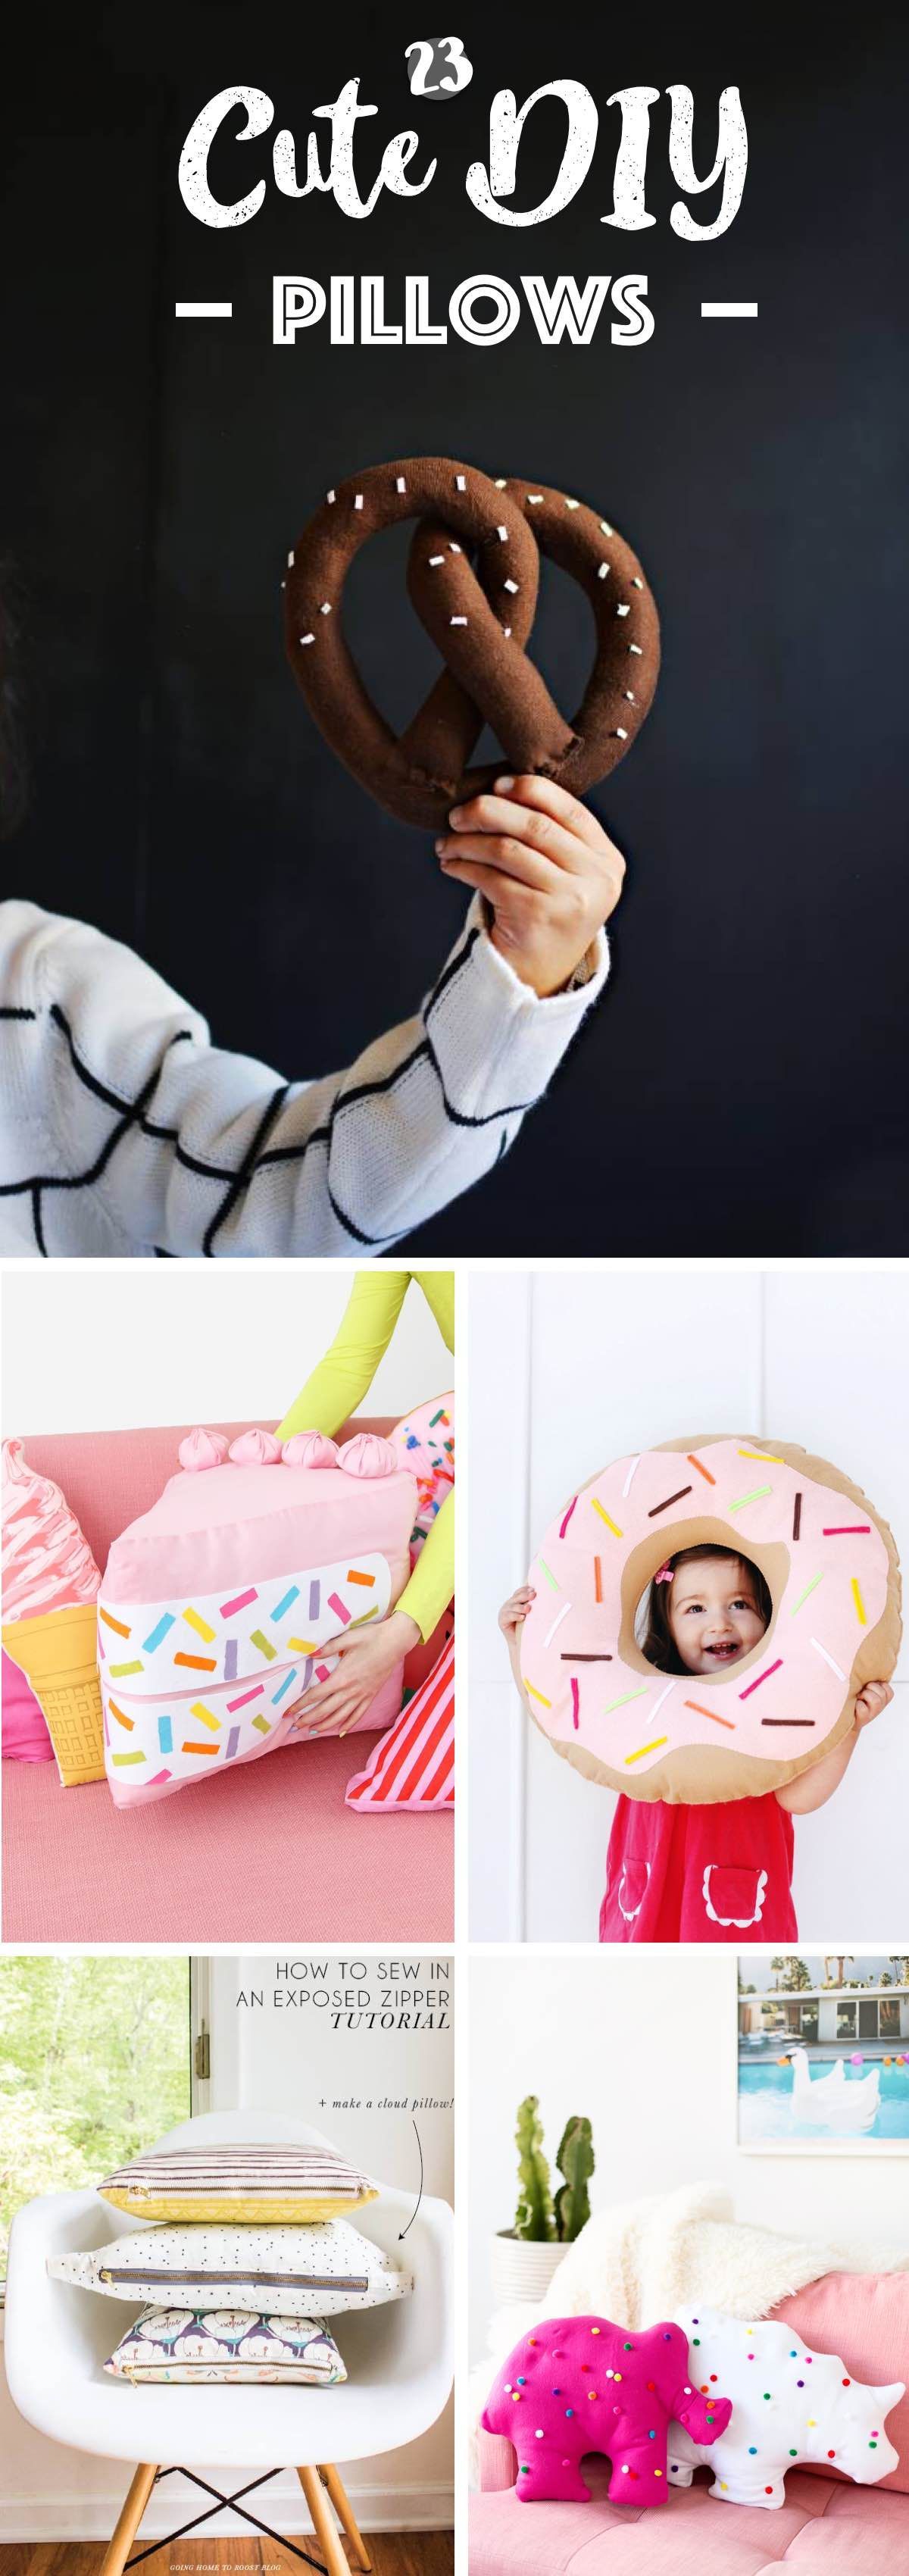 23 More Than Cute DIY Pillows Ranging From Food to Plants for the Themes! -   18 diy pillows food
 ideas